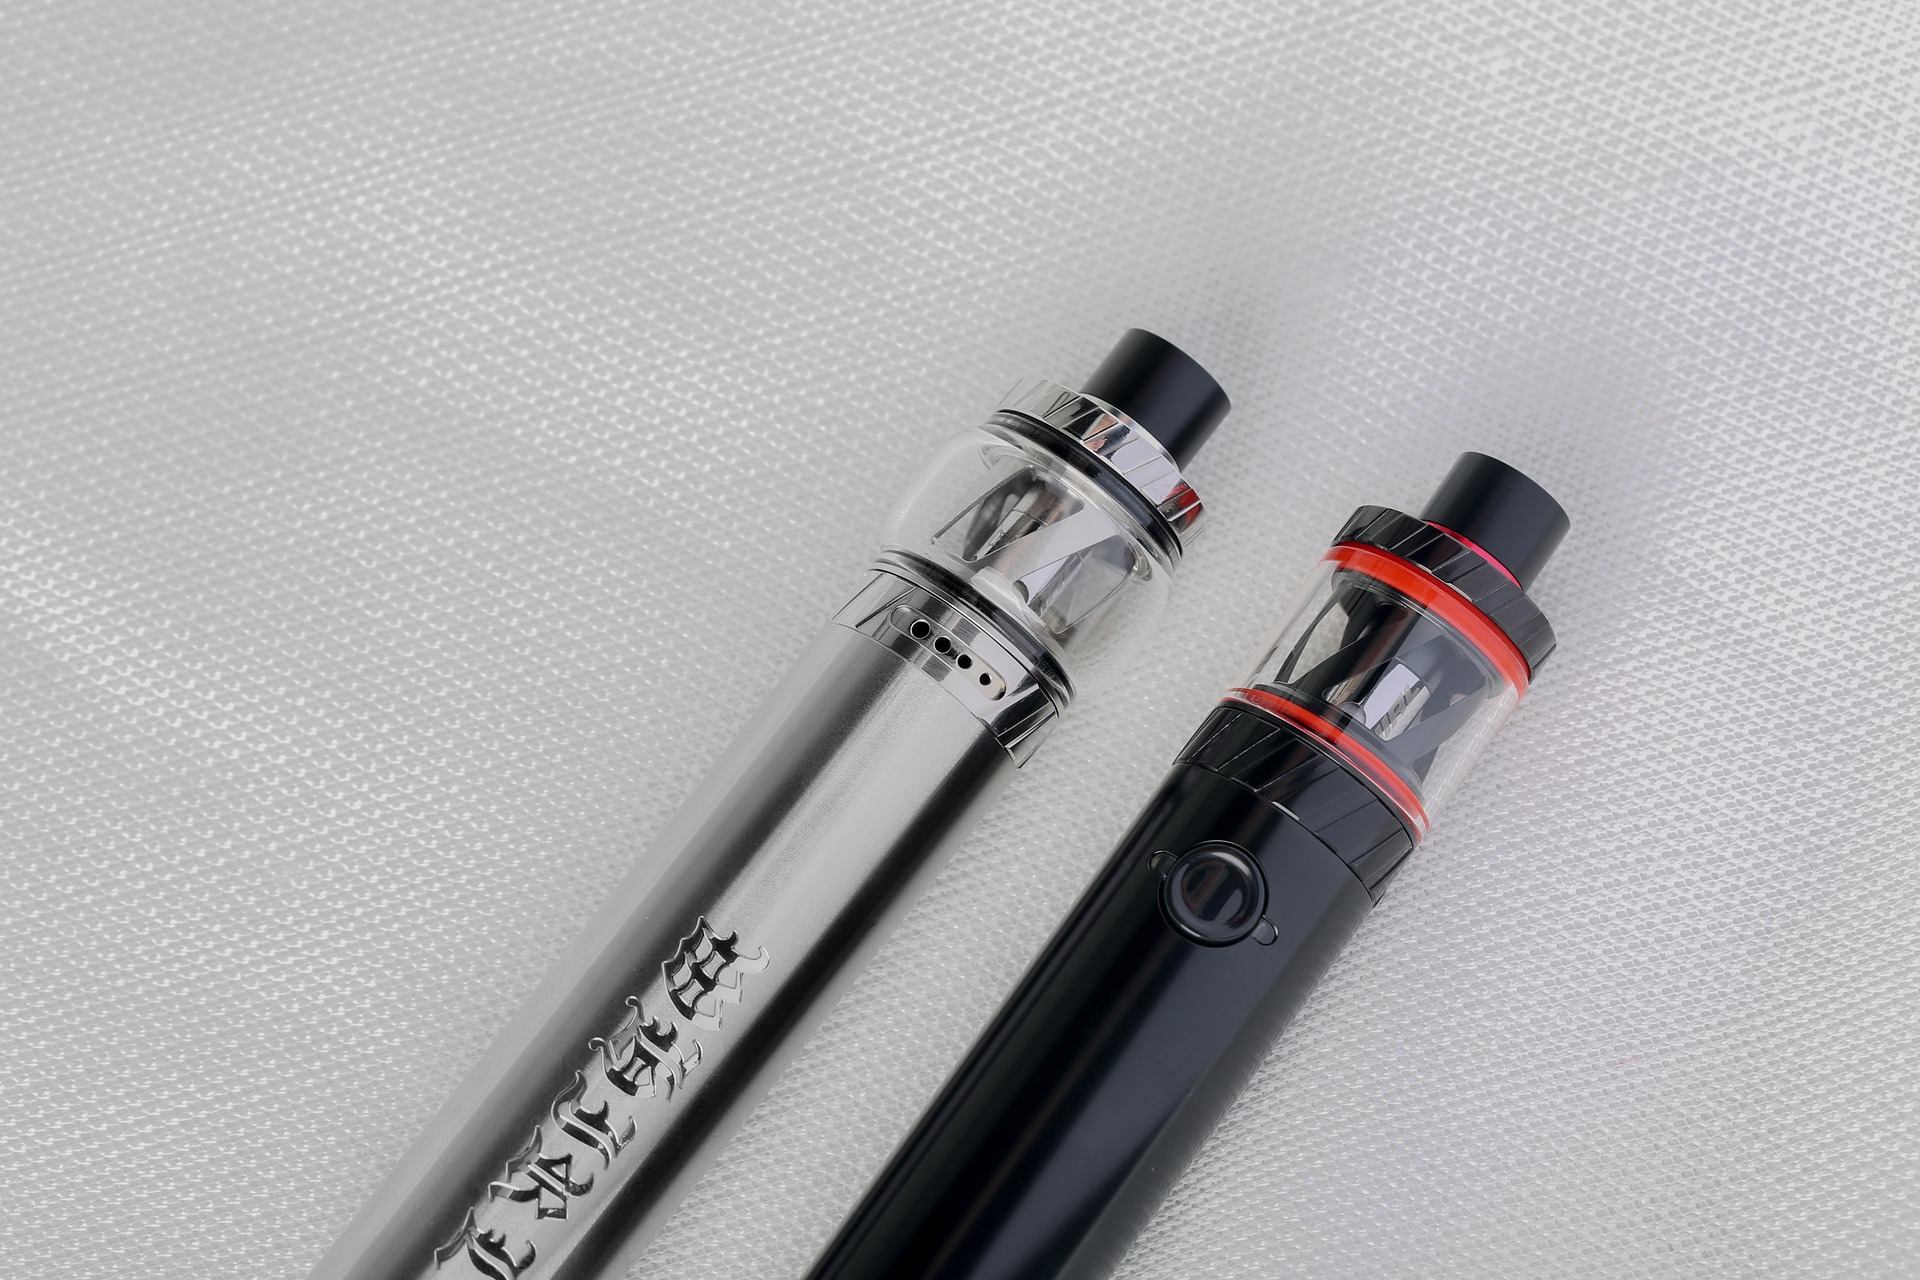 What makes e-liquids better for your lifestyle than tobacco cigarettes?